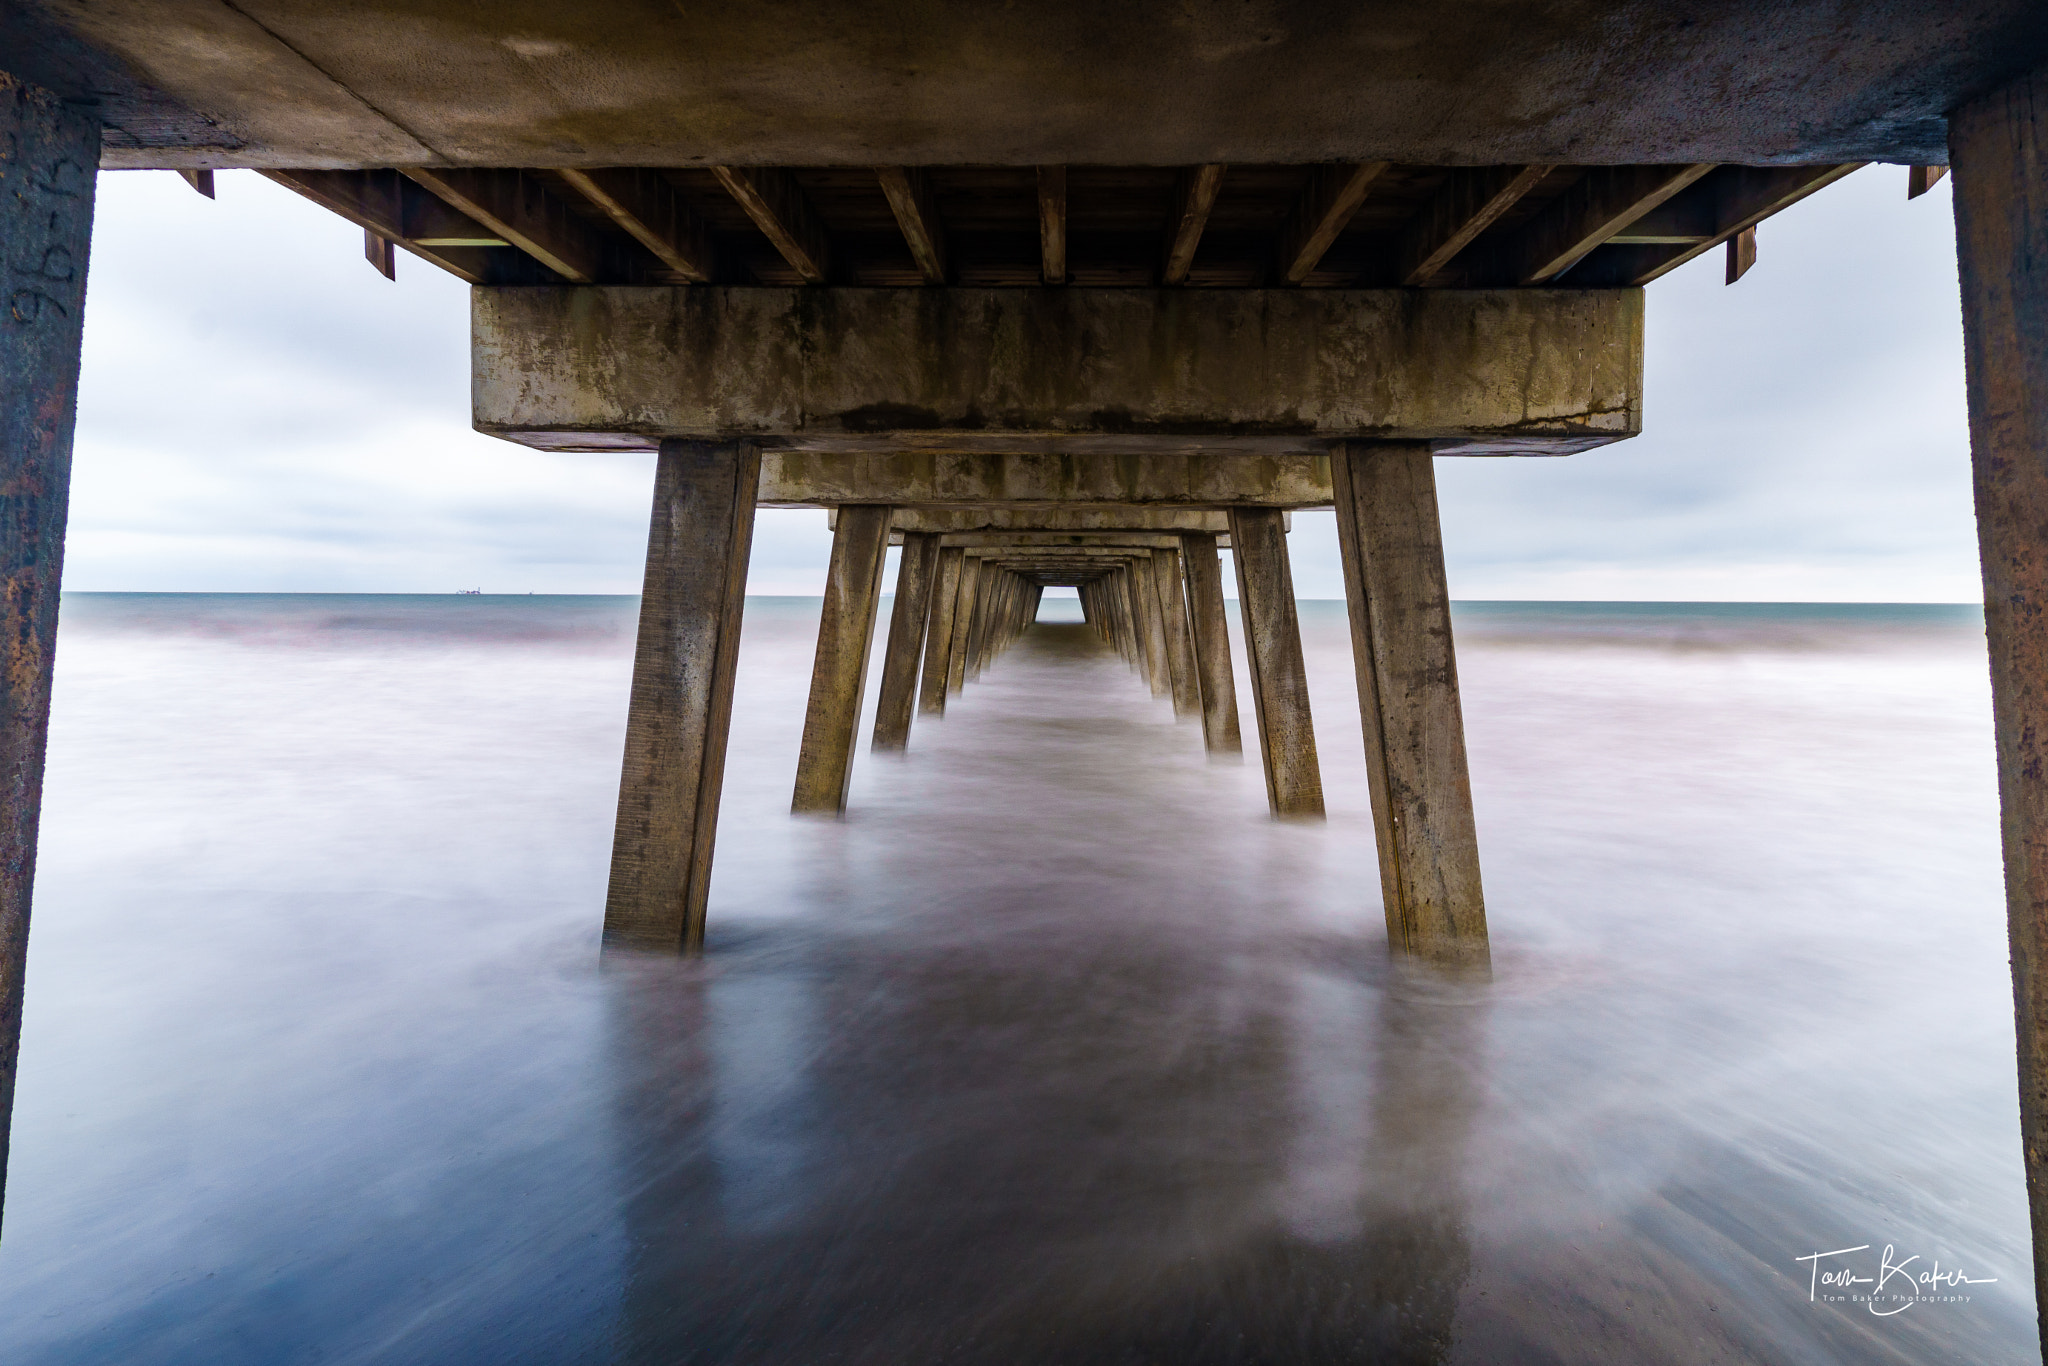 Sony a6300 sample photo. Under the tybee island pier photography